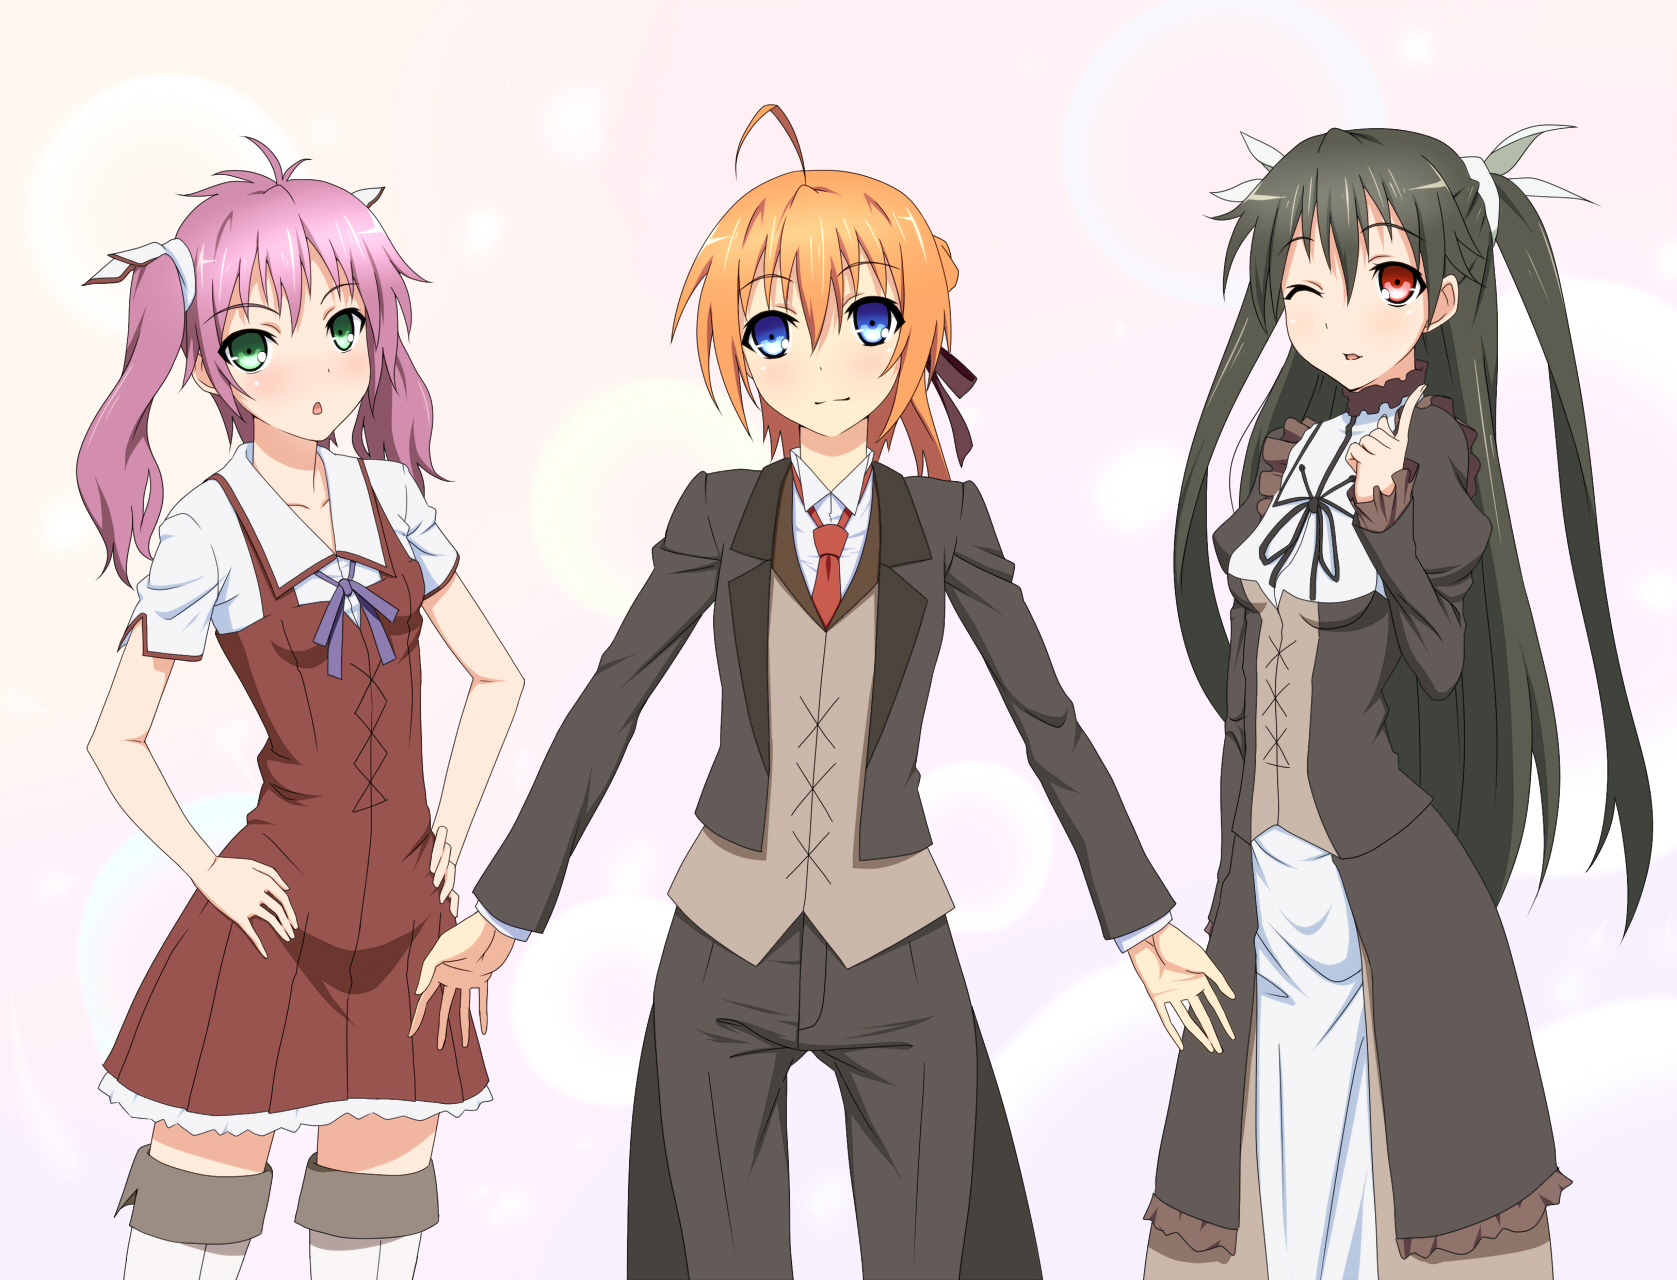 Amazing Mayo Chiki! Pictures & Backgrounds